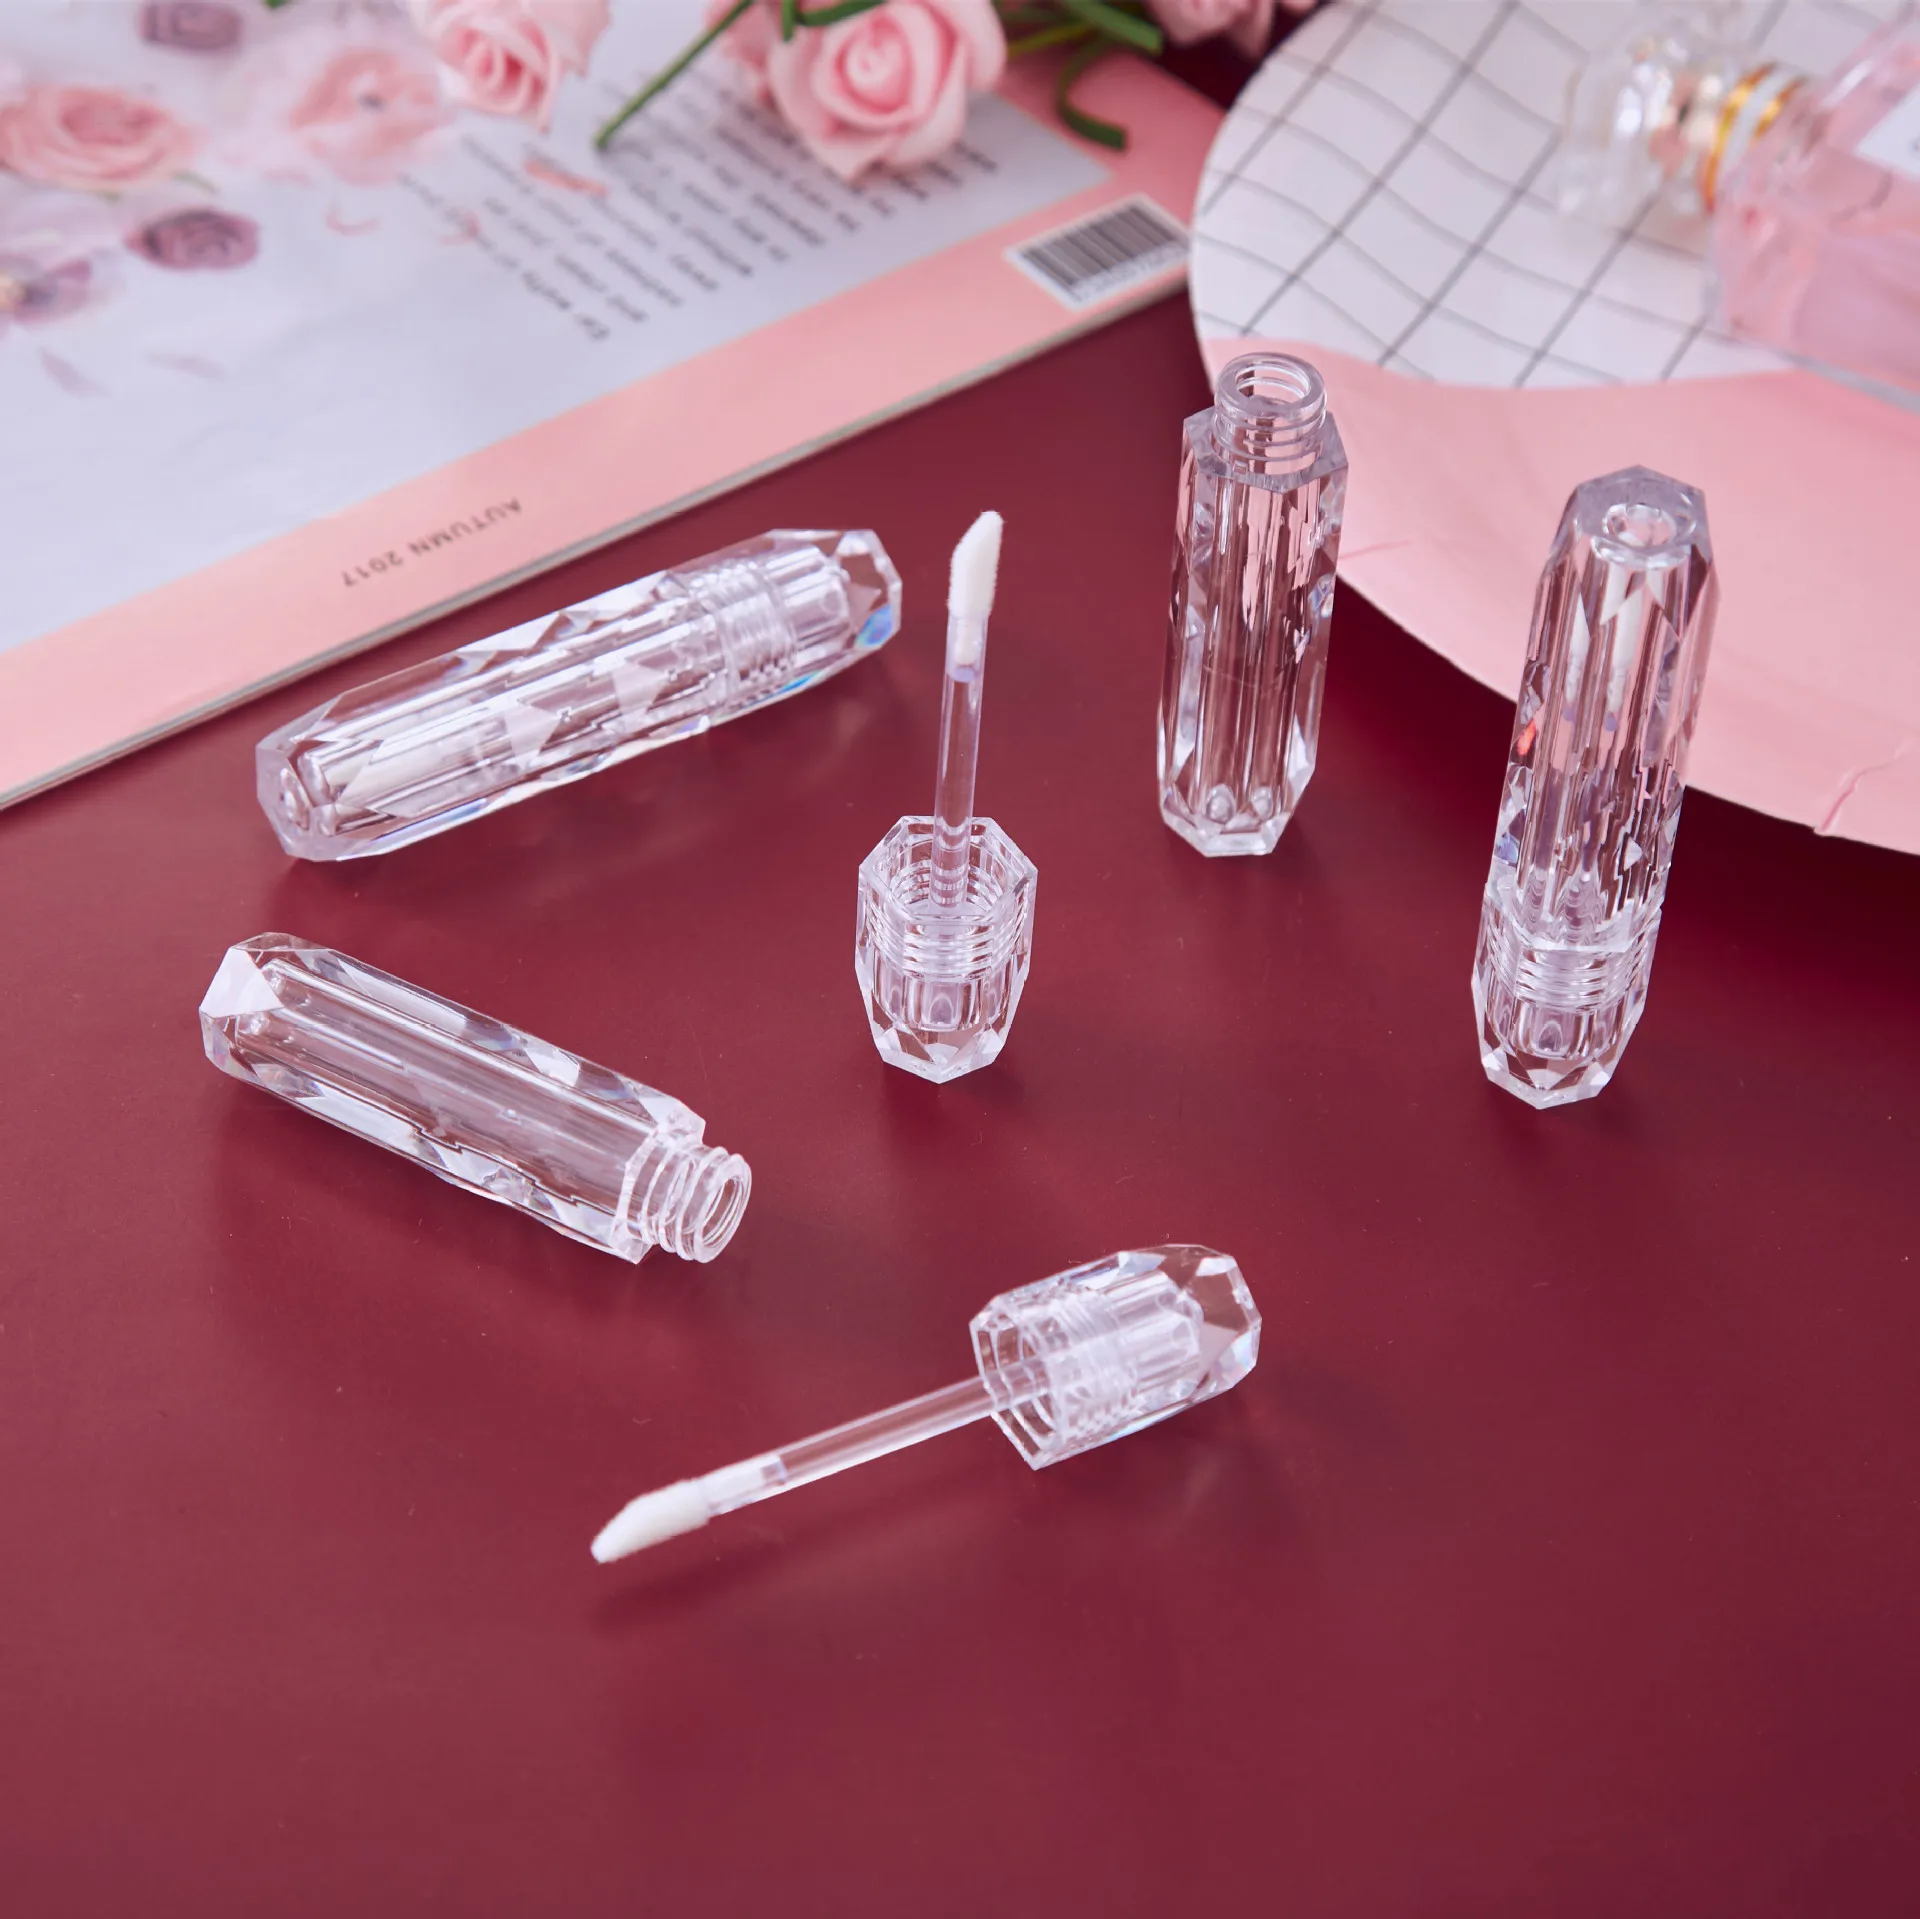 2.5ml Diamond Clear Plastic Lip Gloss Empty Tube Cosmetic LipGloss Container Packaging risenke earmould earpiece earbud mould for two way radio coil tube audio kits clear pair of 8